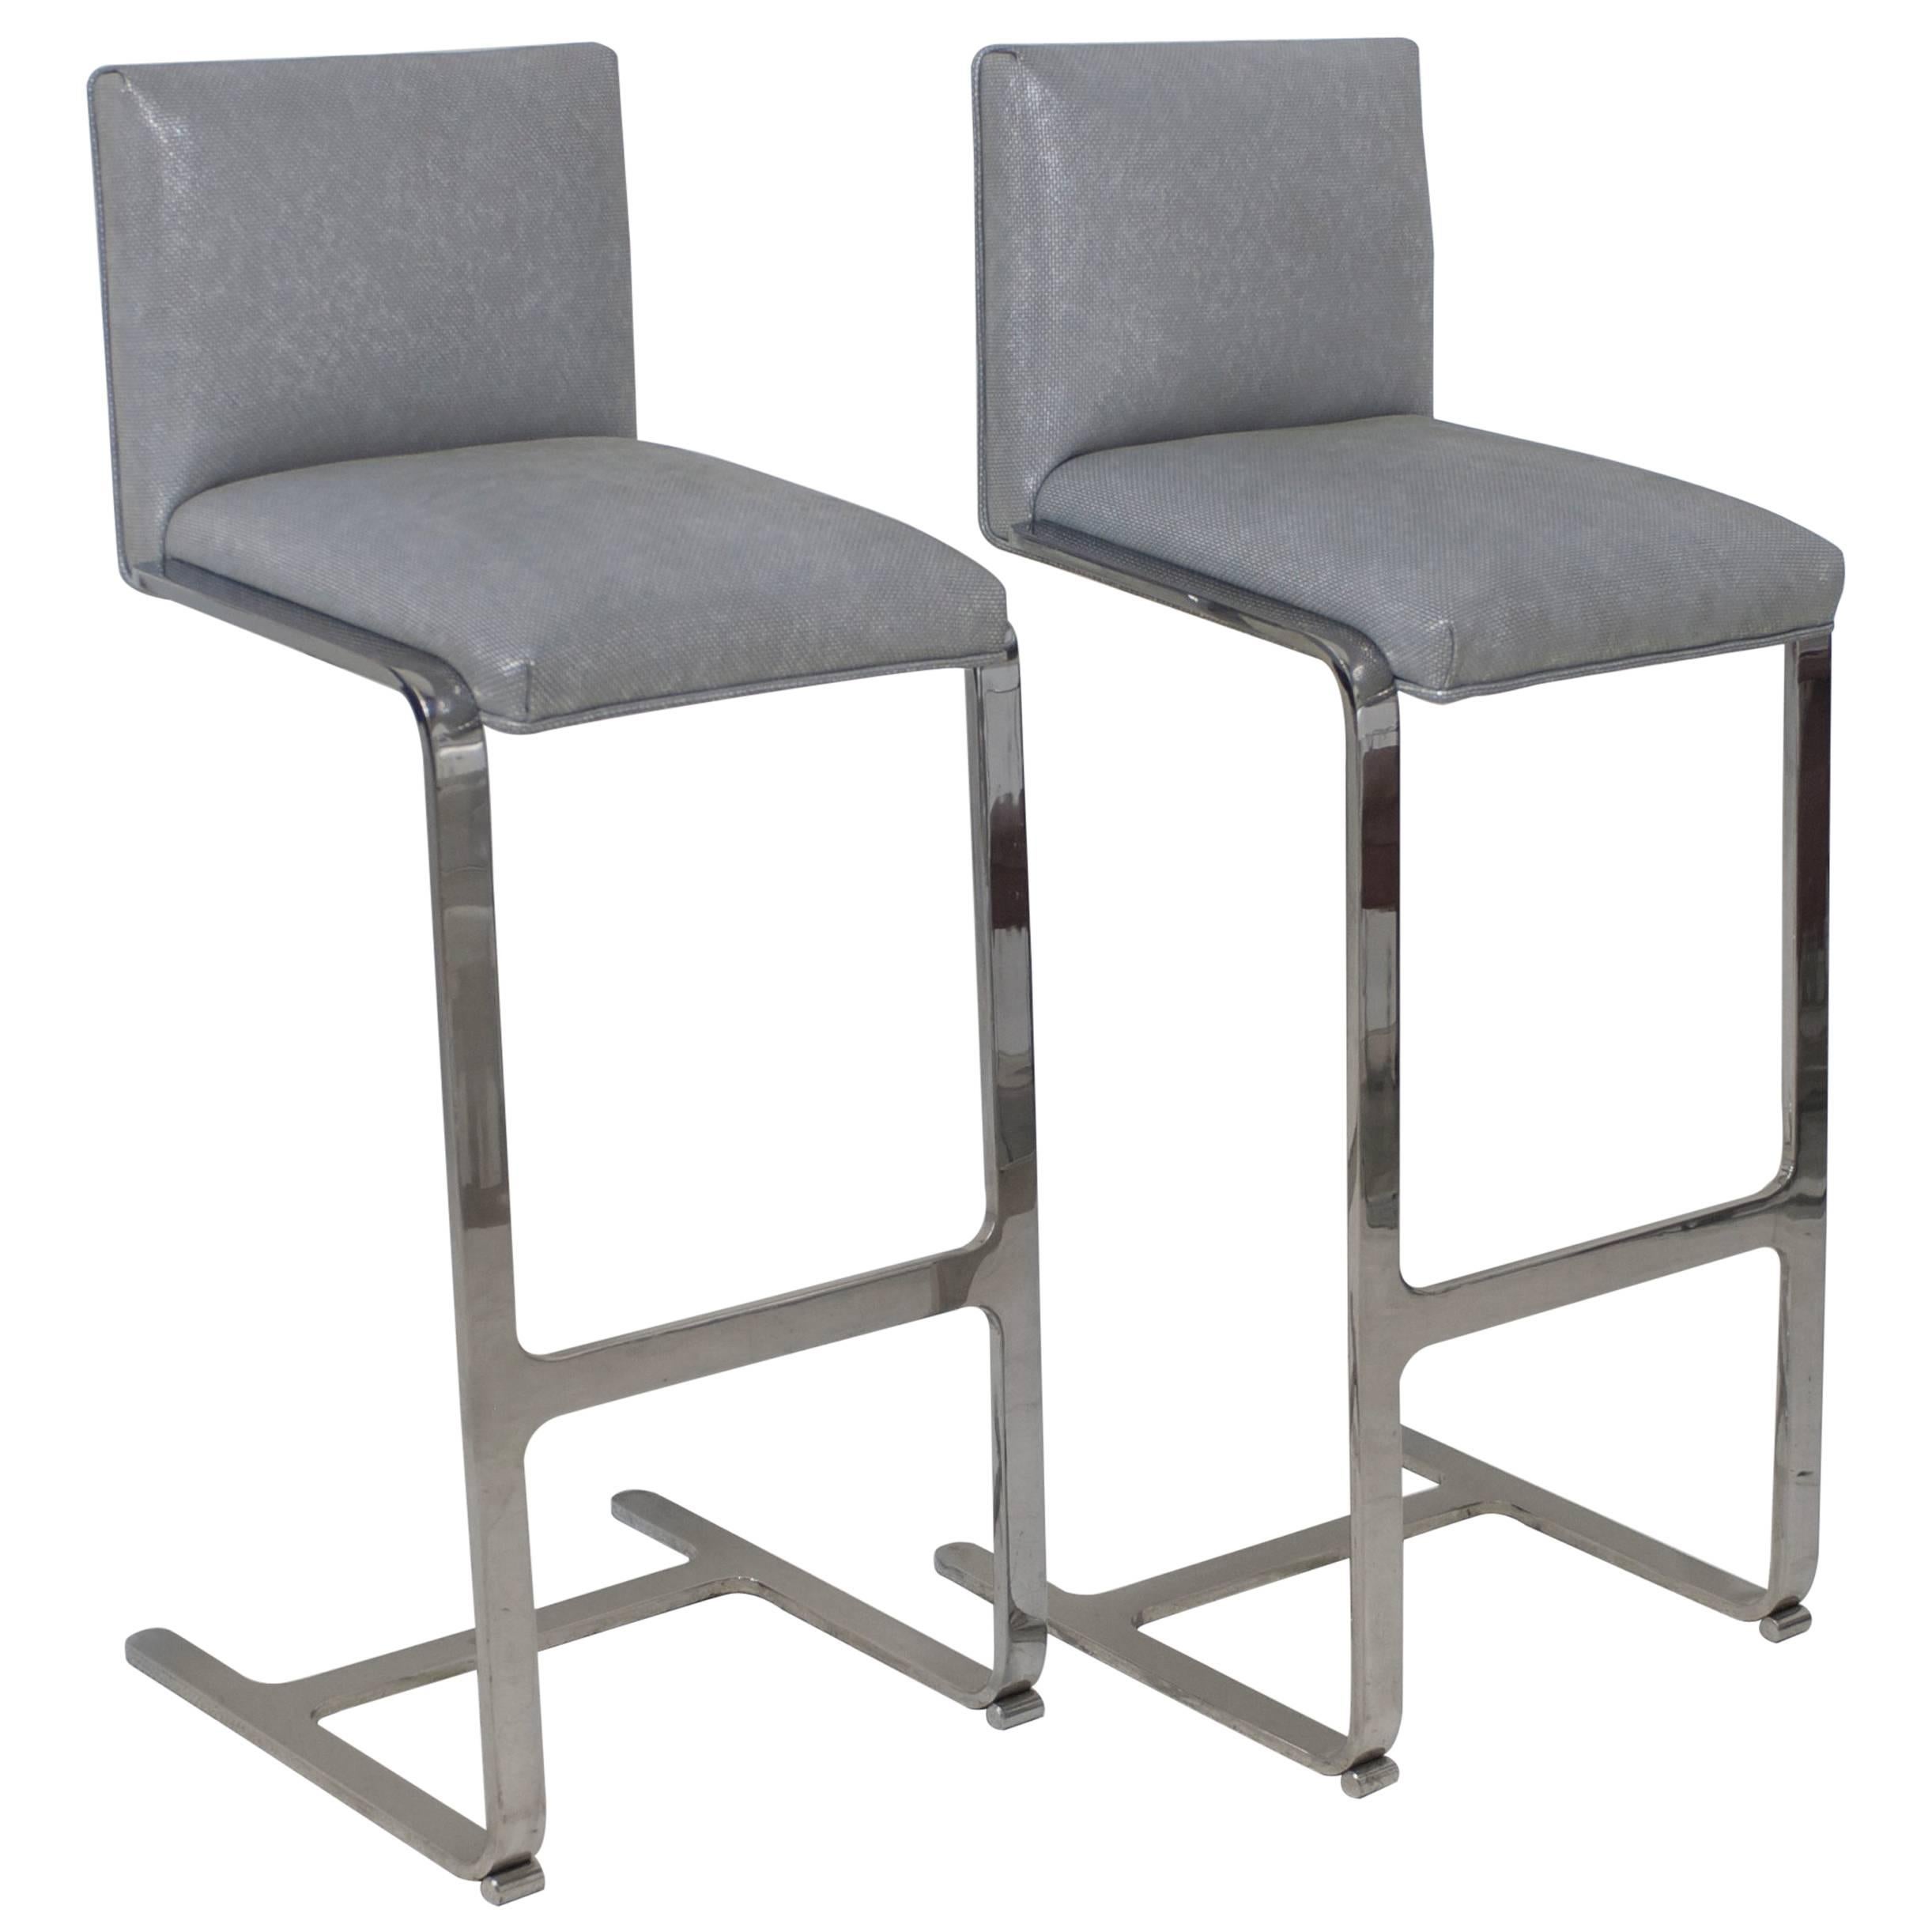 Pair of Bar Height Flat Bar Polished Steel Bar Stools For Sale